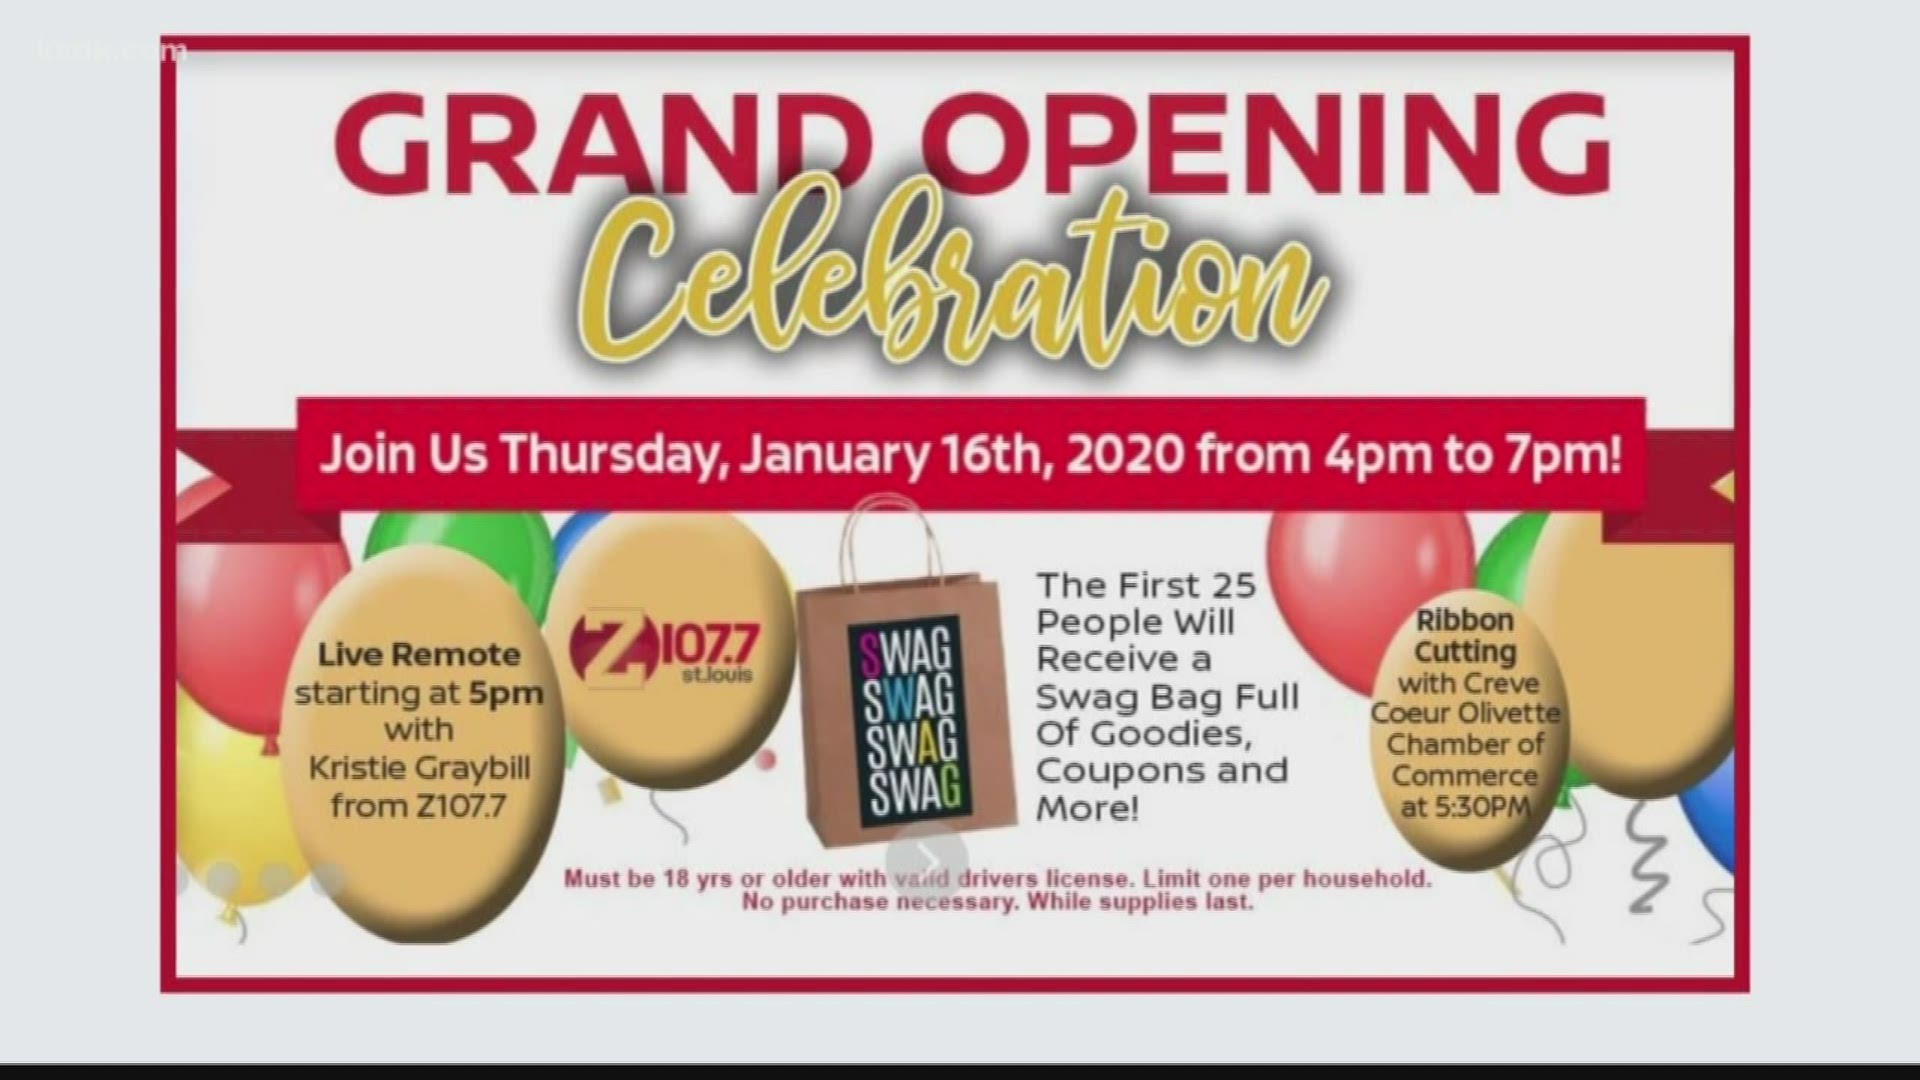 Check out great cars, deals and more at the Napleton Nissan Grand Opening event!